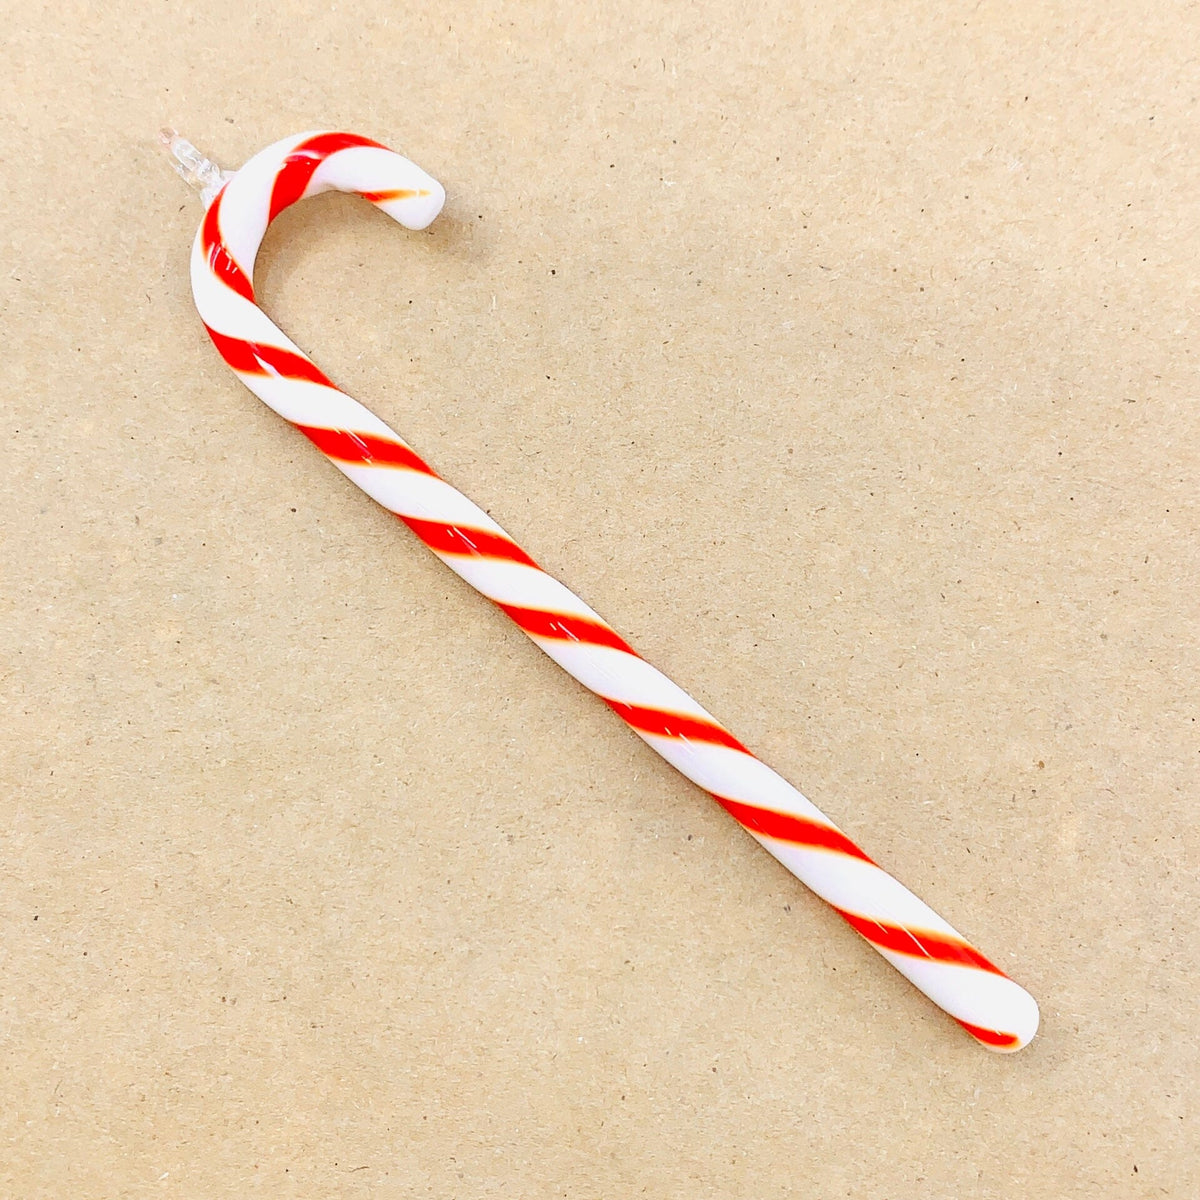 Glass Candy Cane Ornament 238, Peppermint Holiday - 